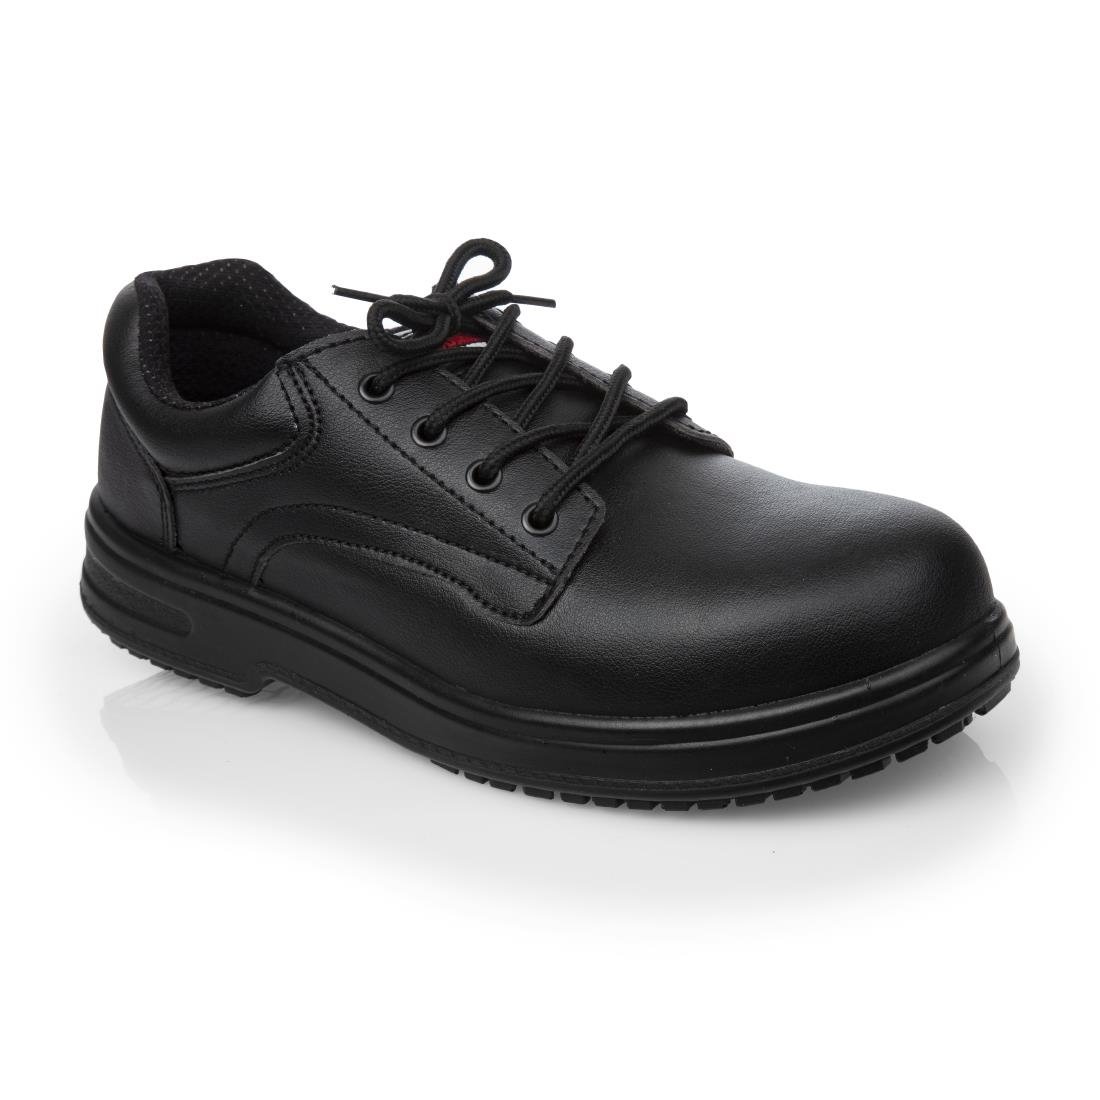 BB497-44 Slipbuster Basic Toe Cap Safety Shoes Black 44 JD Catering Equipment Solutions Ltd